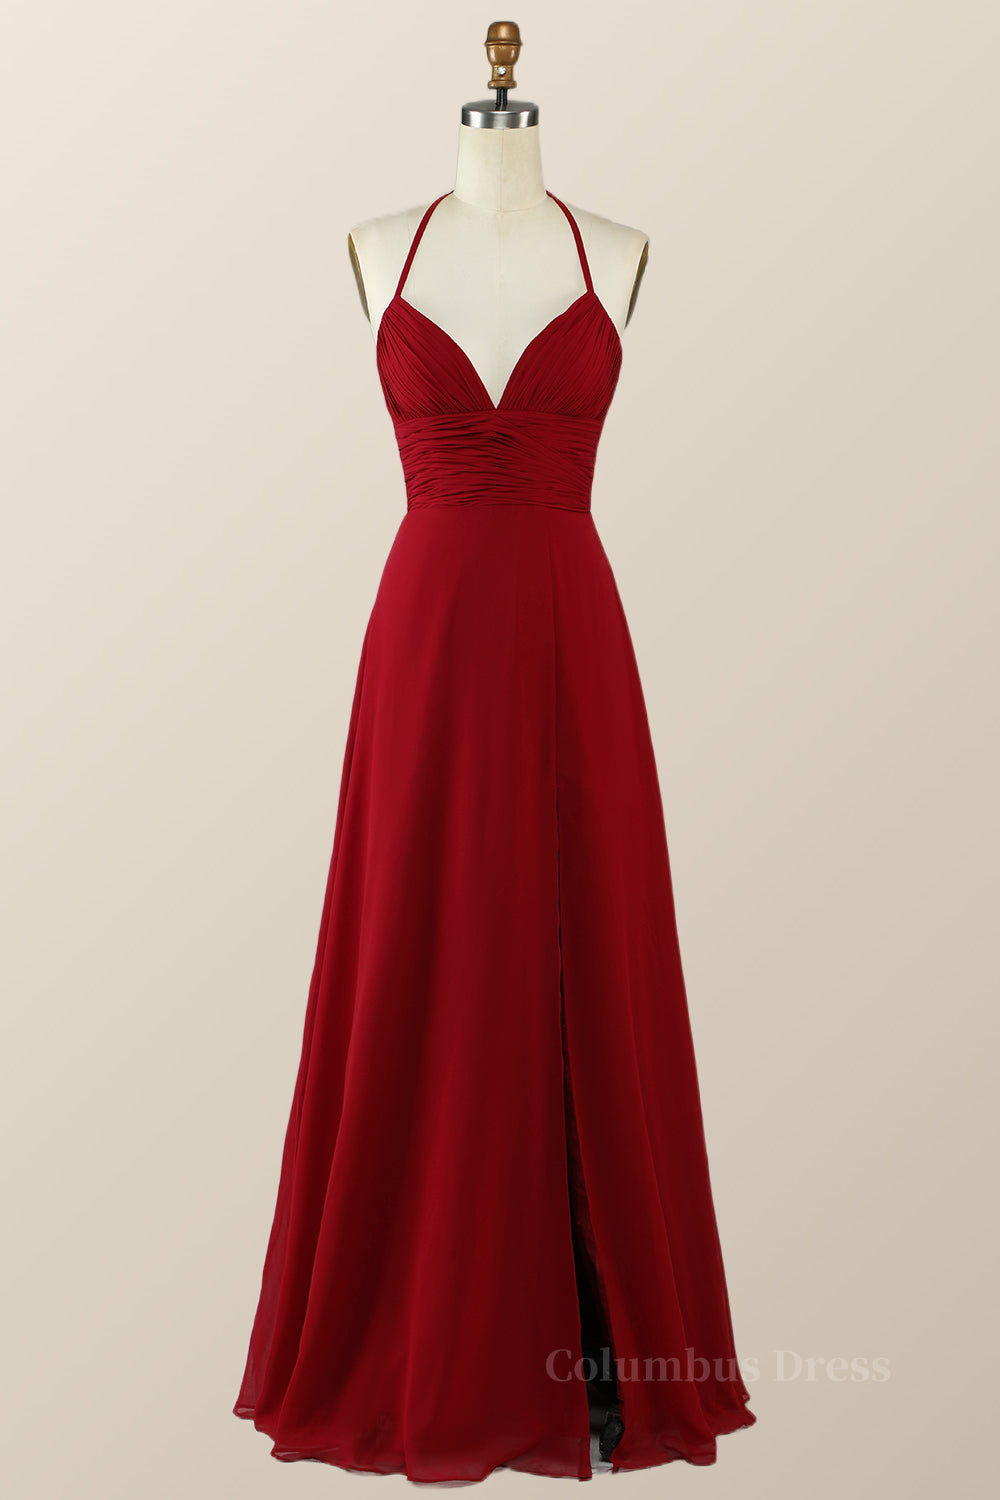 White Prom Dress, Halter Wine Red Empire A-line Long Bridesmaid Dress